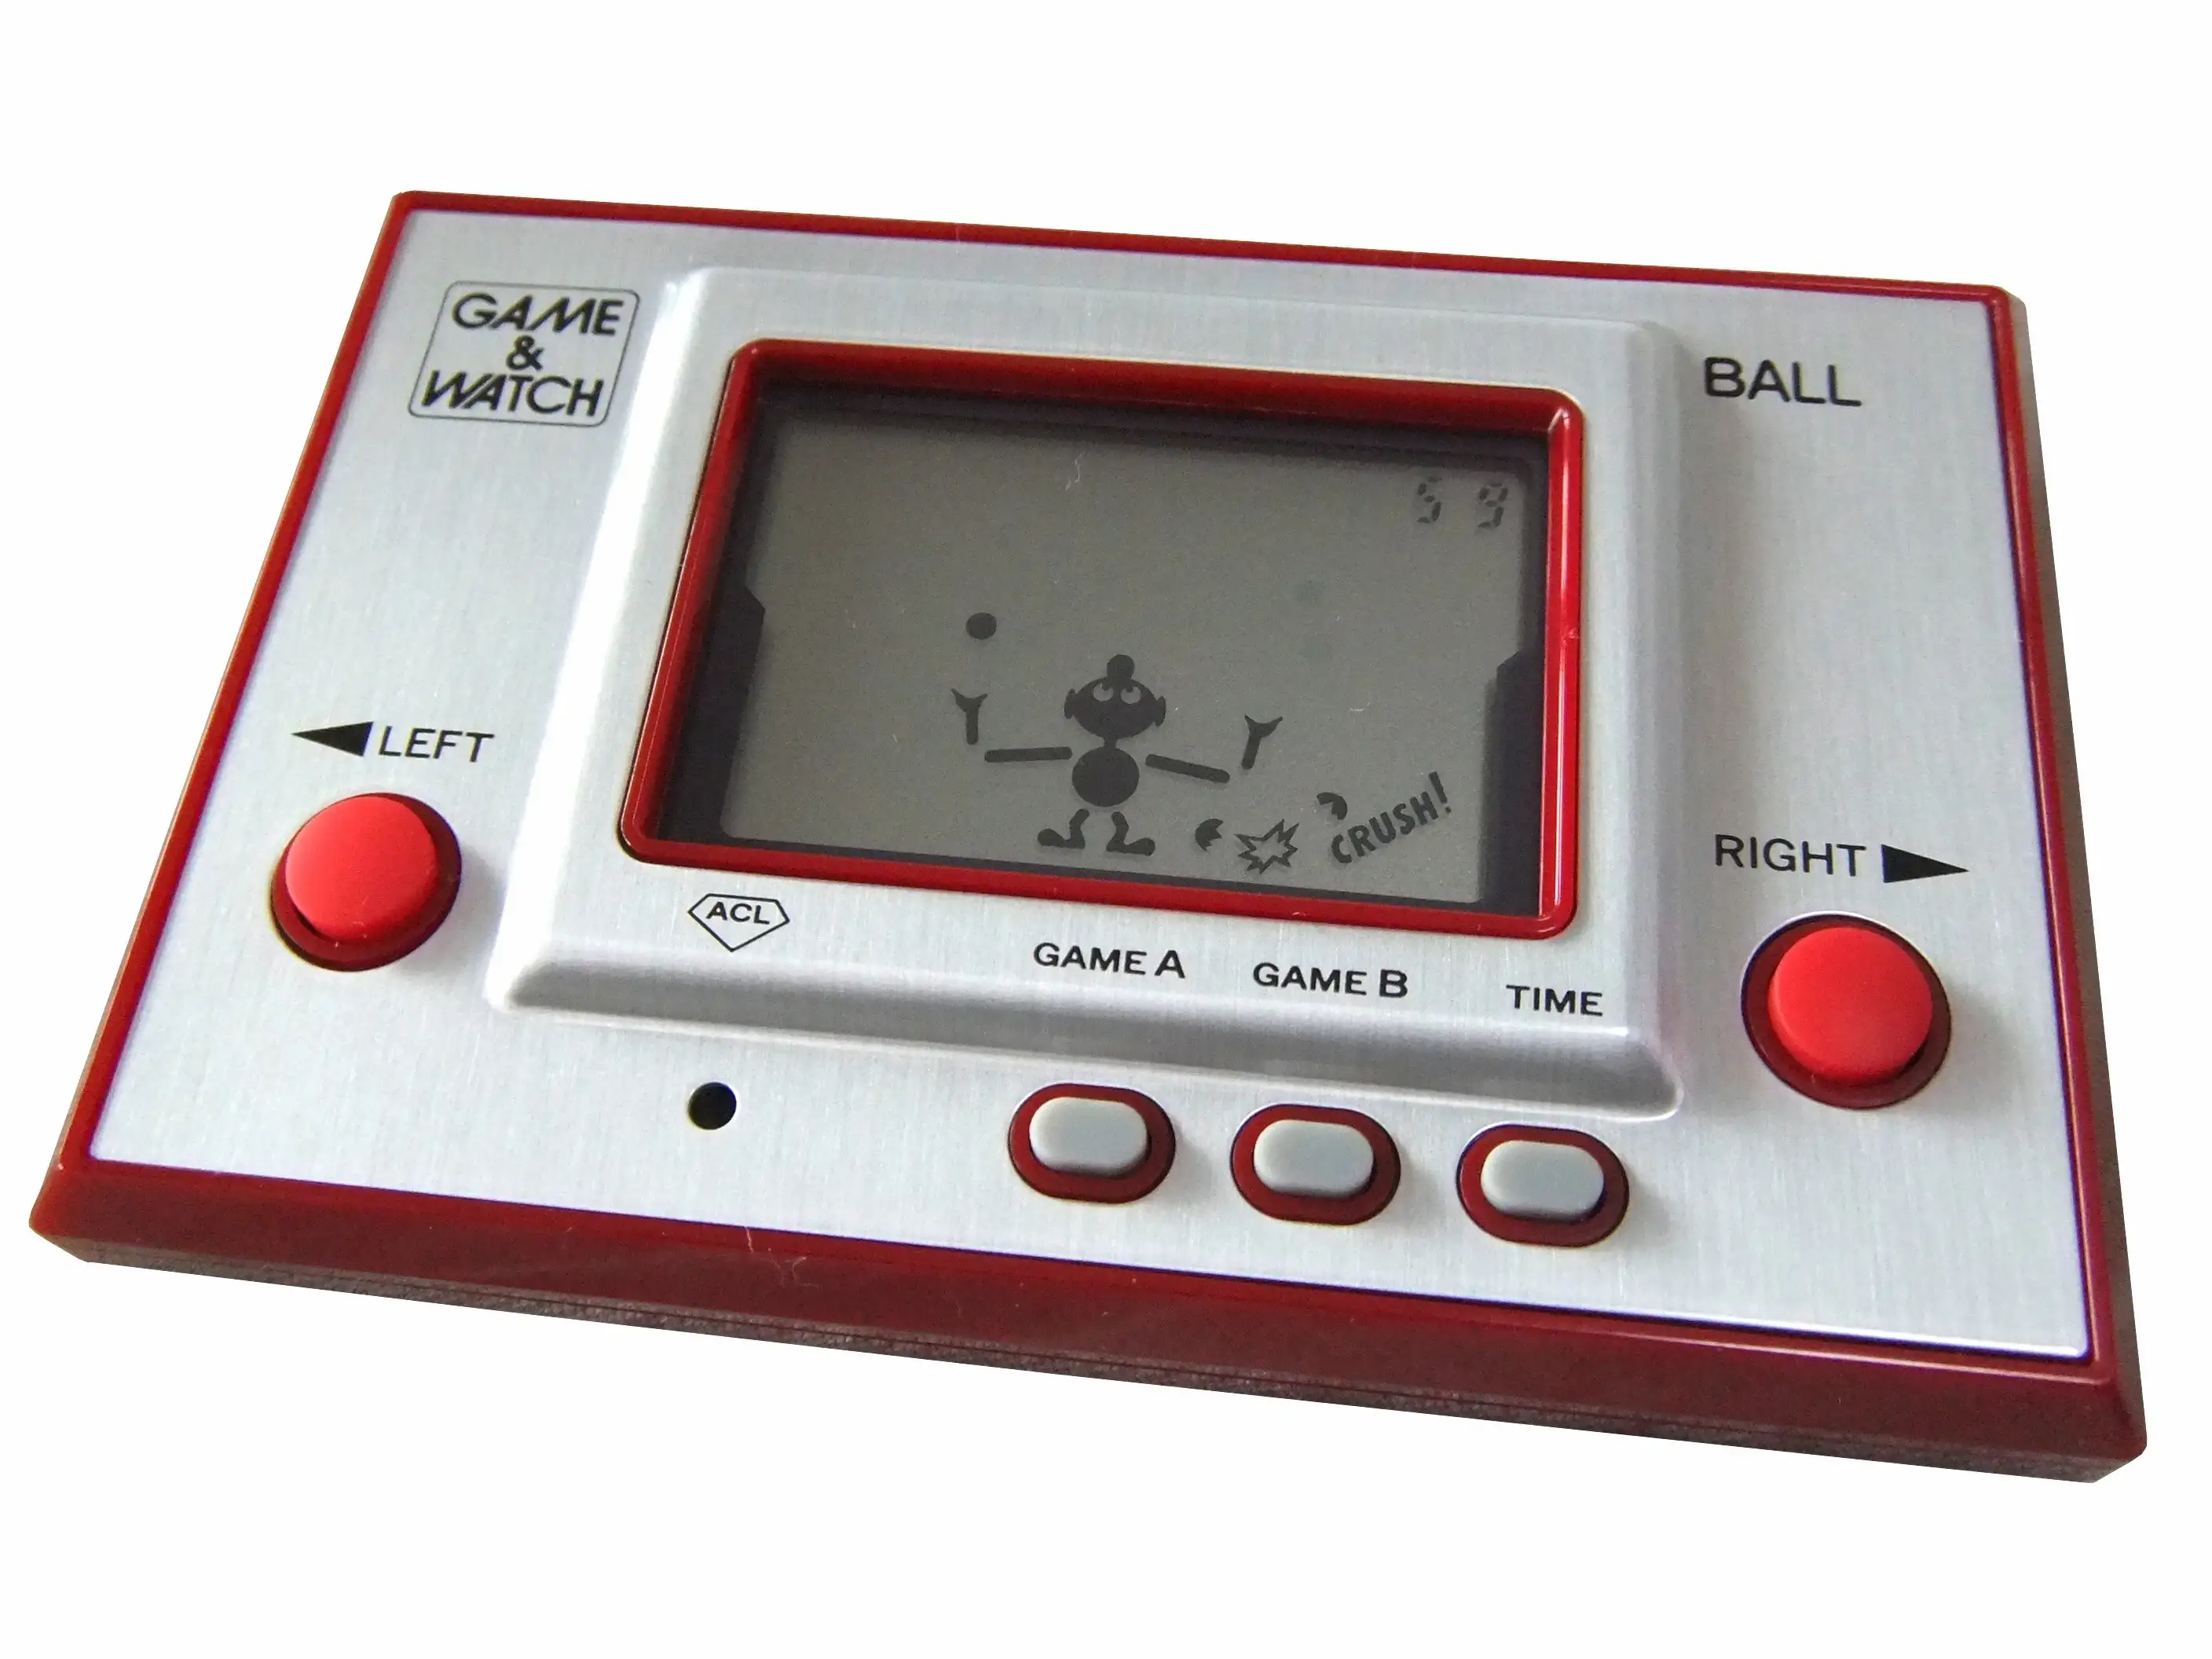 Nintendo's Game & Watch Ignited a Design Transformation